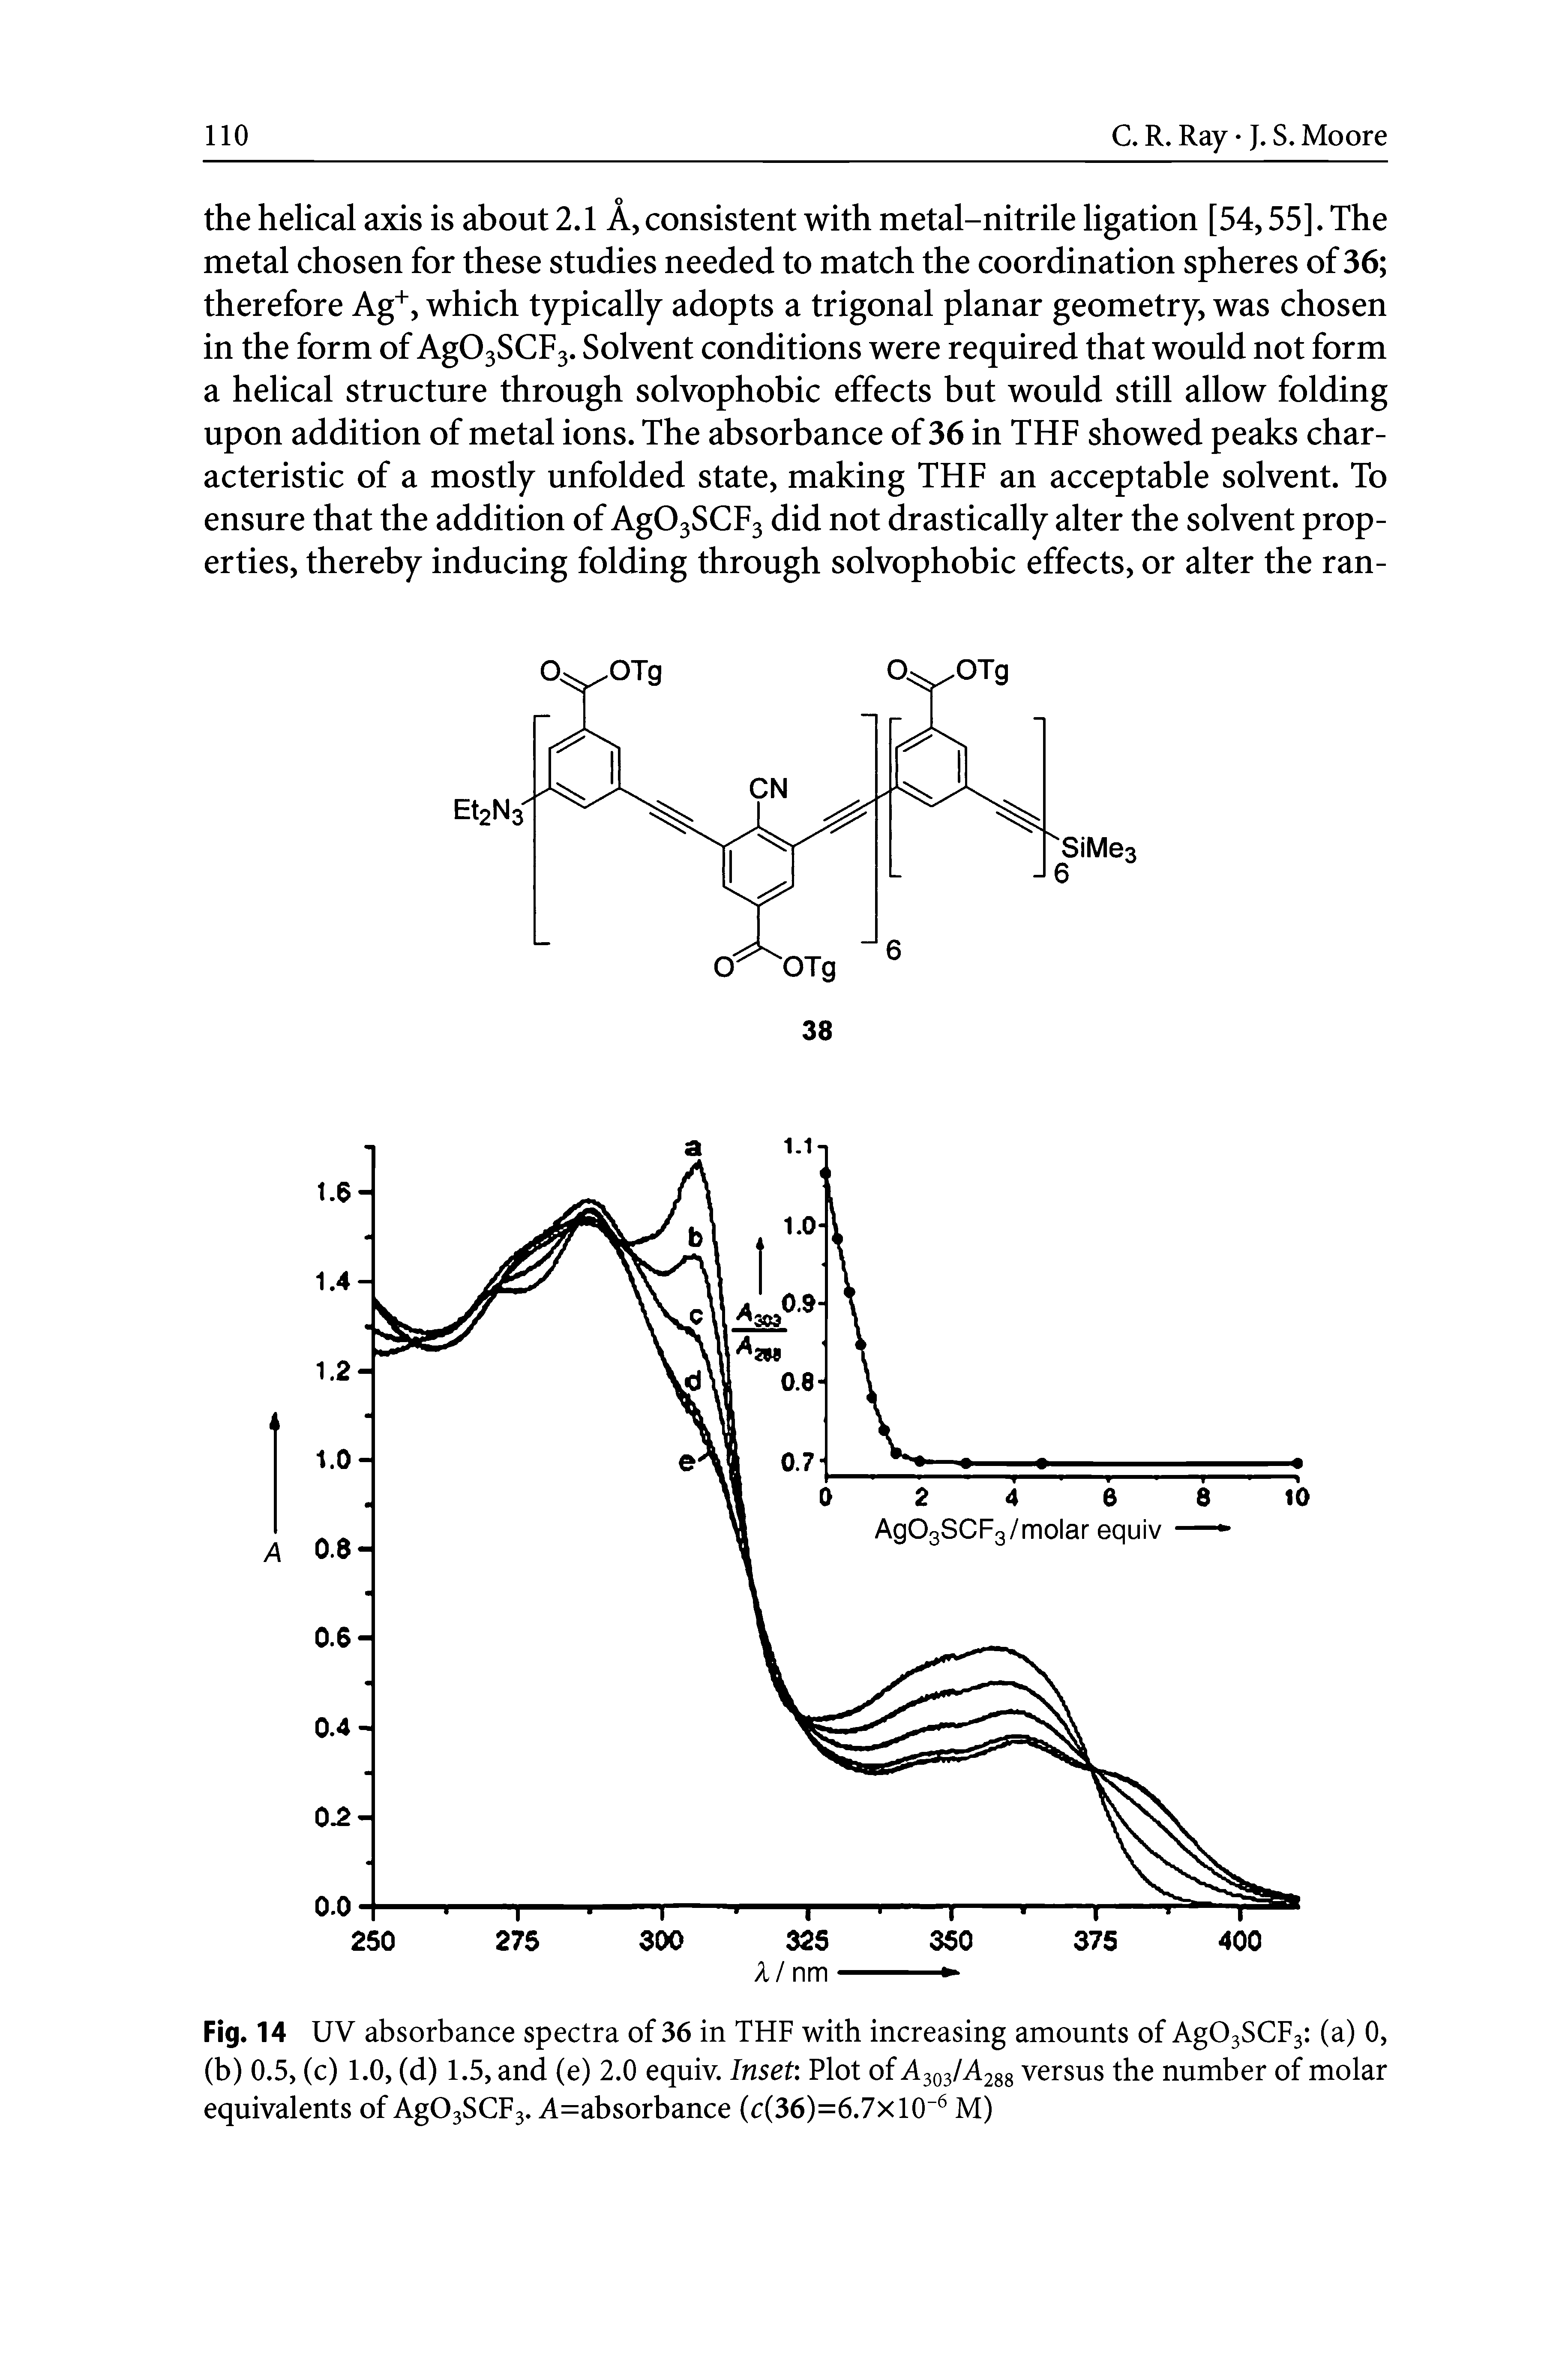 Fig. 14 UV absorbance spectra of 36 in THF with increasing amounts of Ag03SCp3 (a) 0, (b) 0.5, (c) 1.0, (d) 1.5, and (e) 2.0 equiv. Inset Plot of A303M288 versus the number of molar equivalents of Ag03SCp3. A=absorbance (c(36)=6.7xl0 M)...